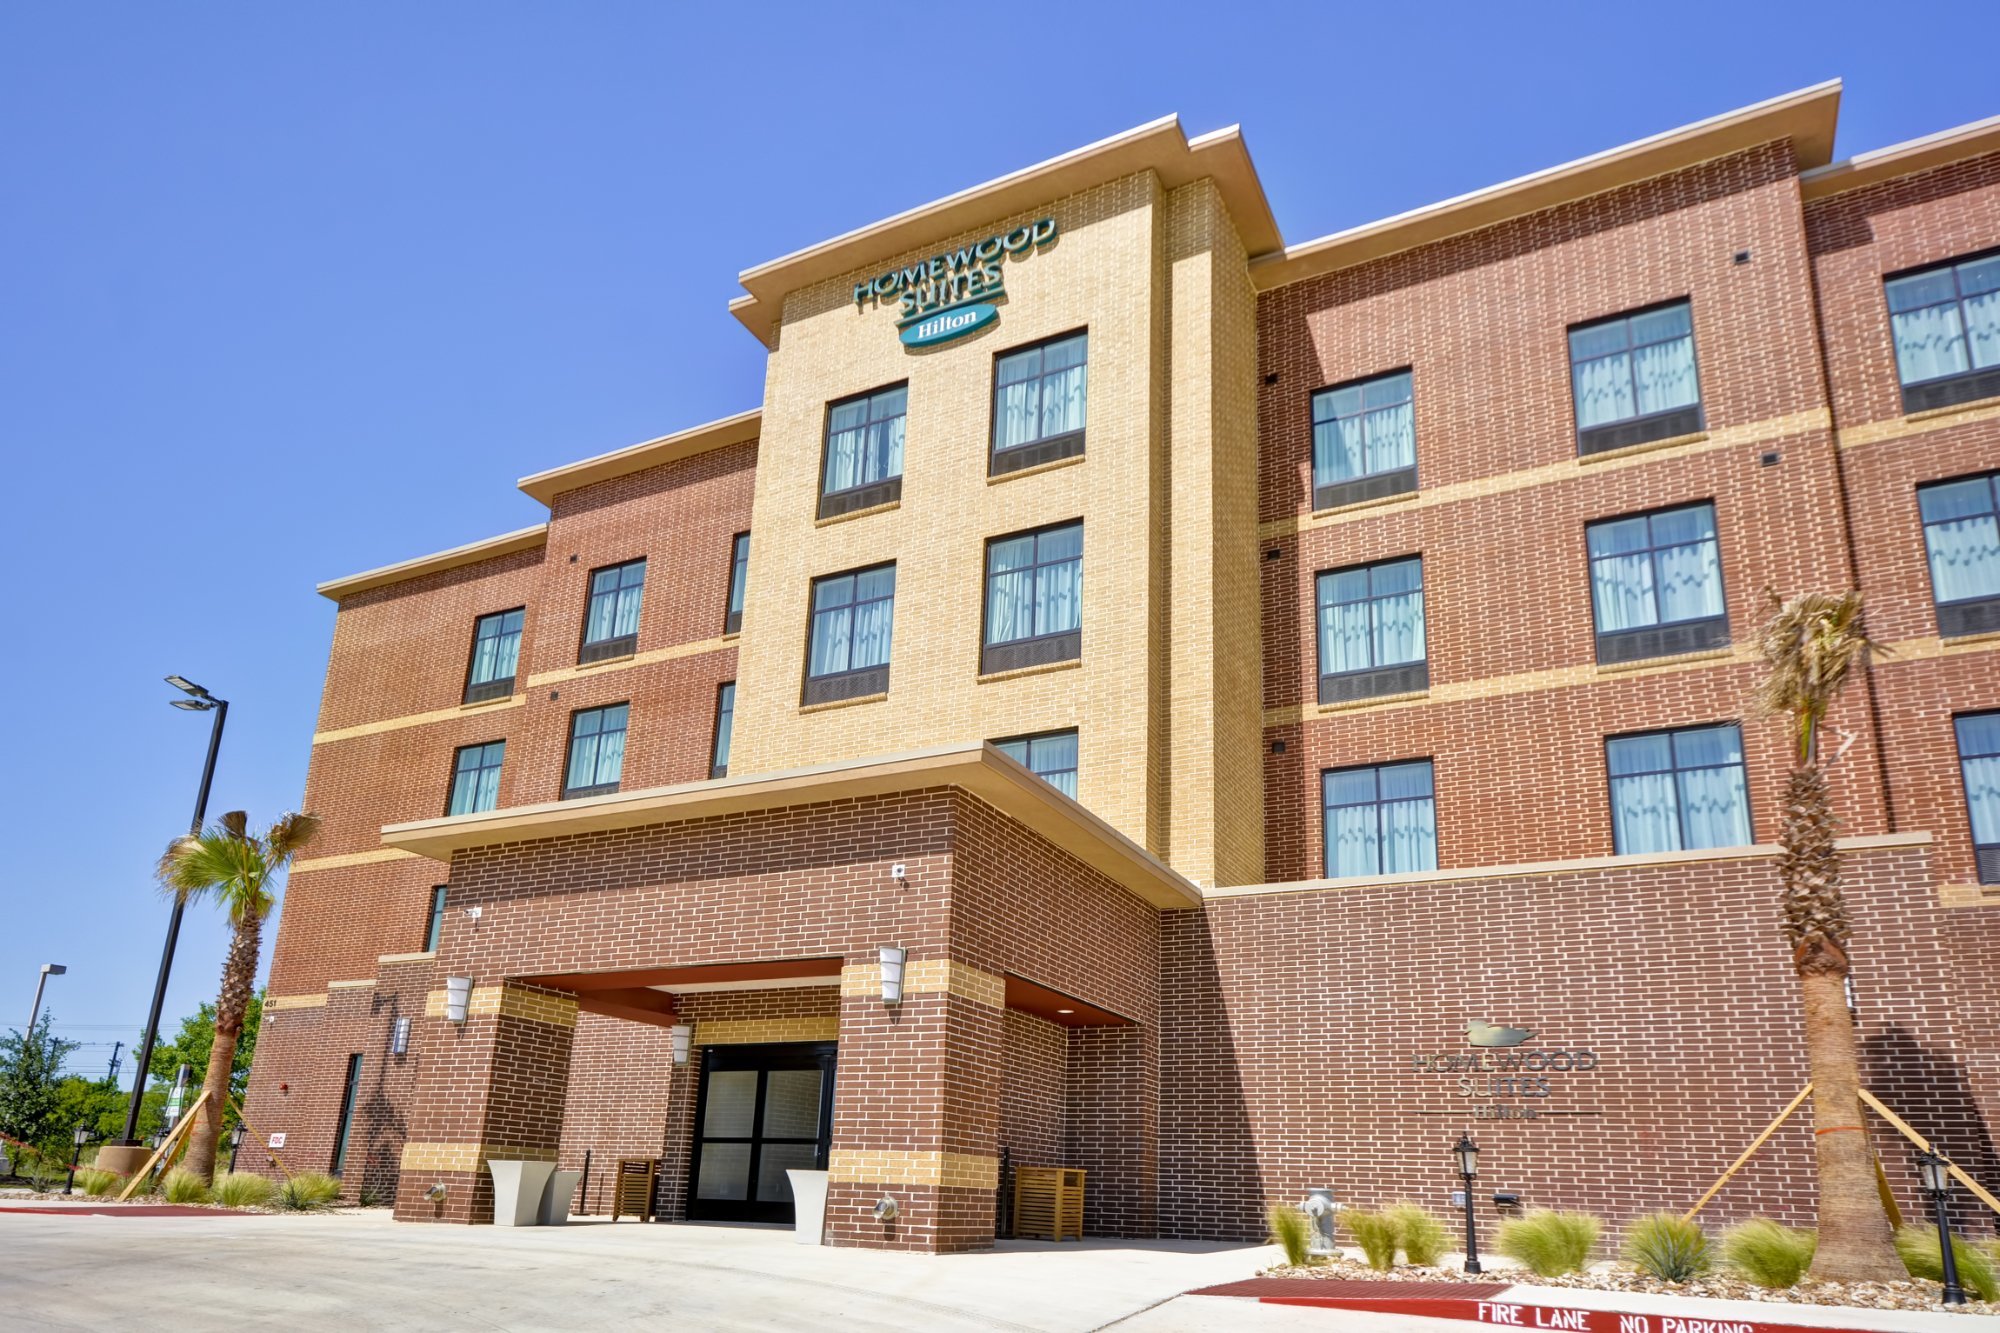 Photo of Homewood Suites by Hilton San Marcos, San Marcos, TX